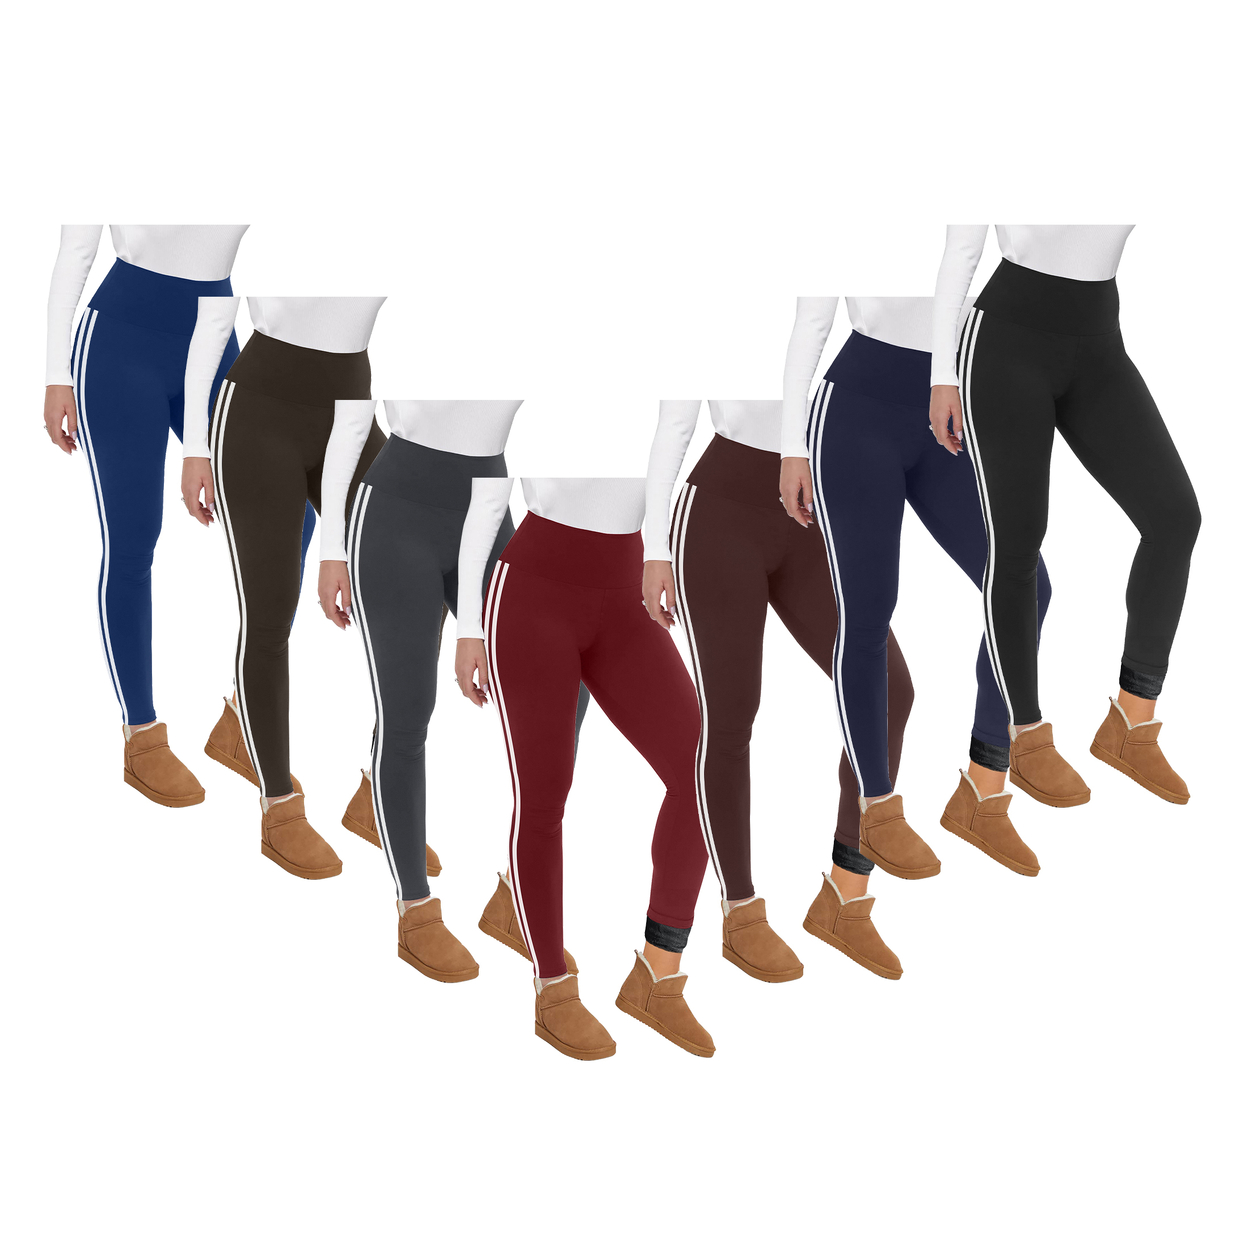 4-Pack: Women's Ultra Soft Winter Warm Cozy Striped Fur Lined Yoga Leggings - Assorted, X-large